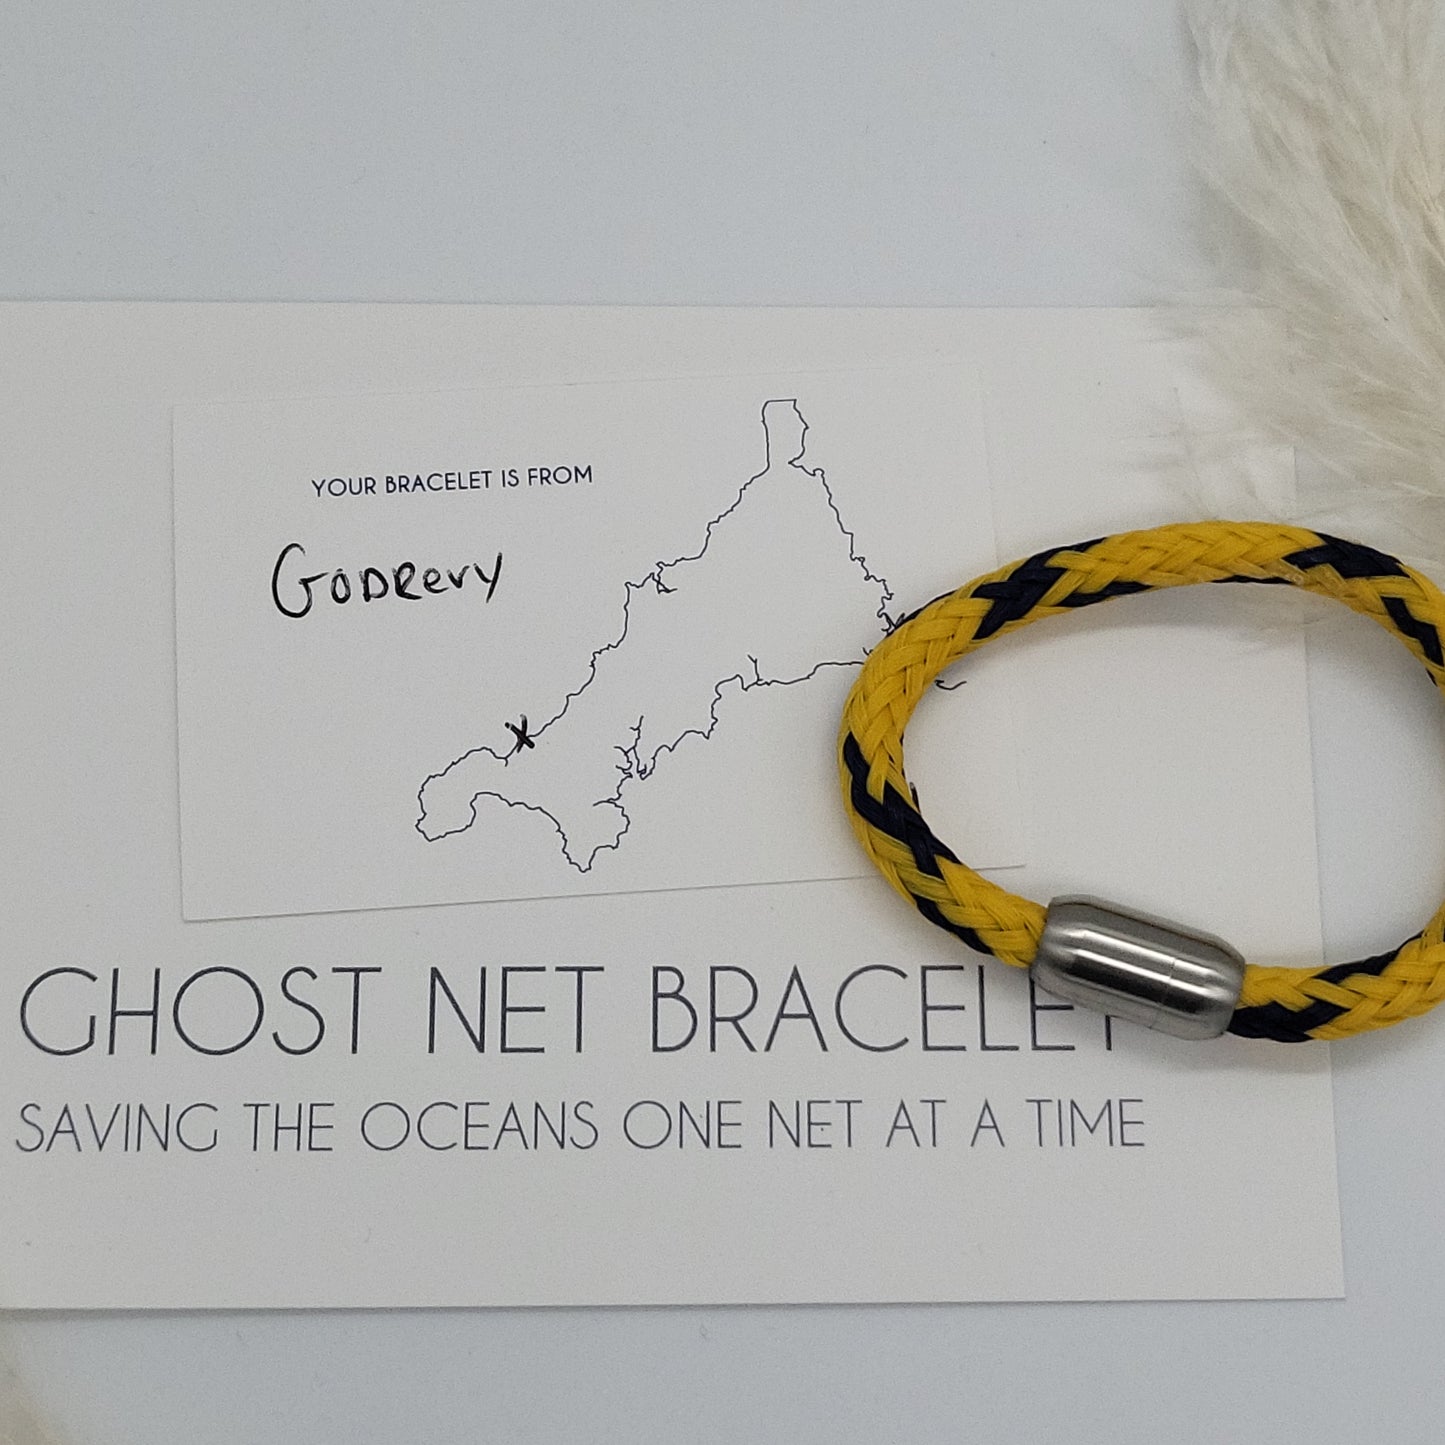 Godrevy Ghost Net Bracelet (Yellow and Blue)- Small